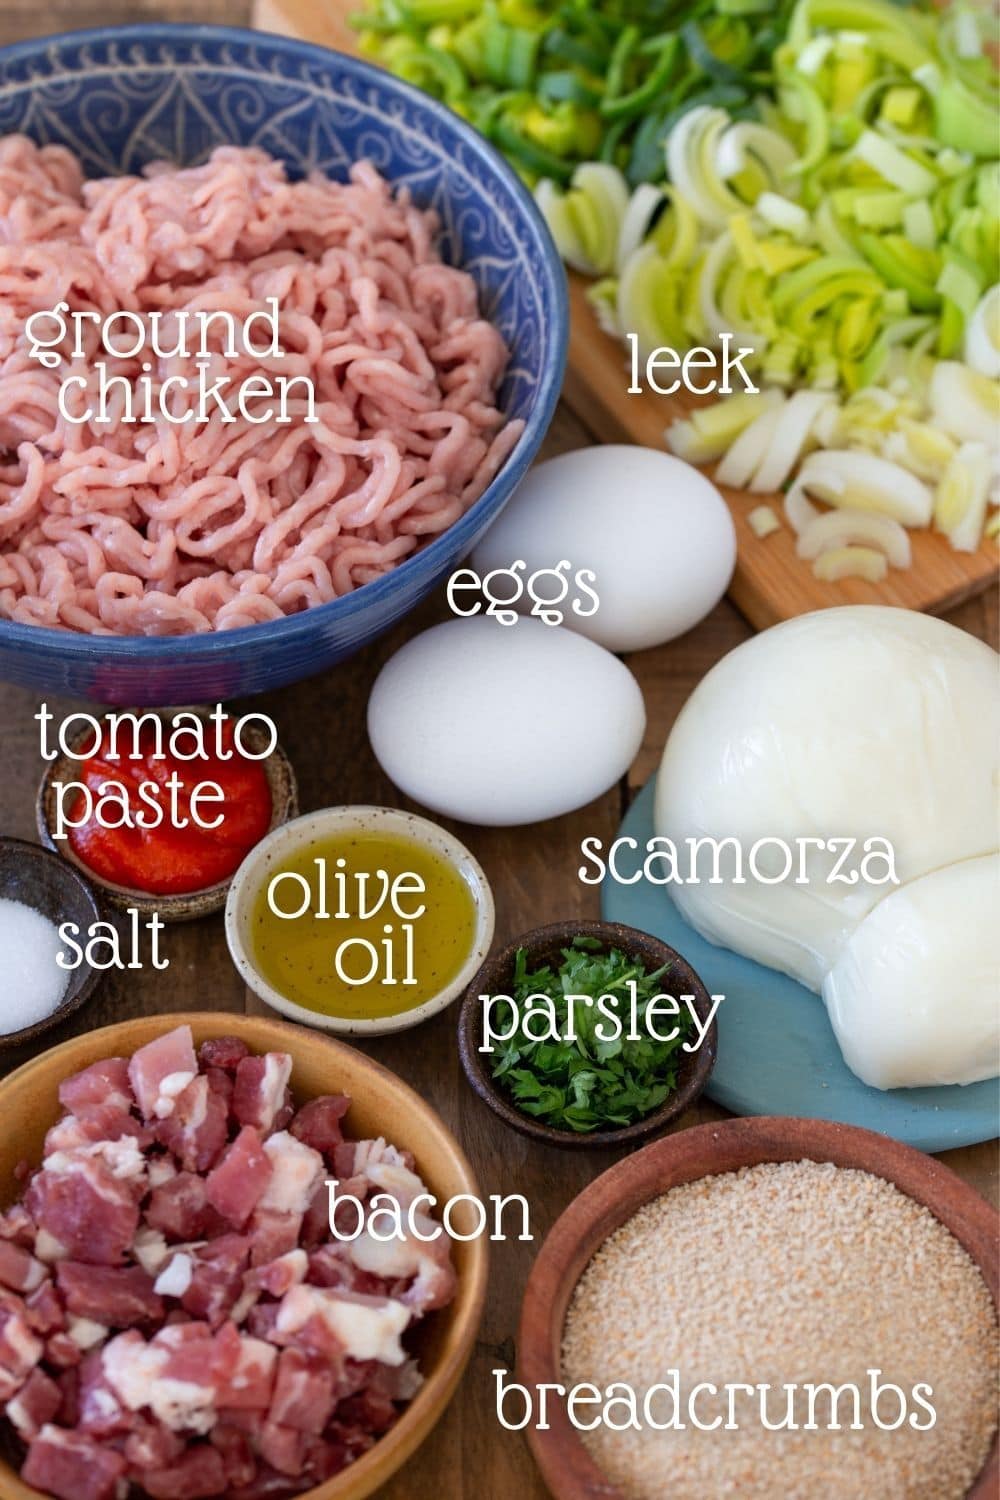 The ingredients needed in this recipe.